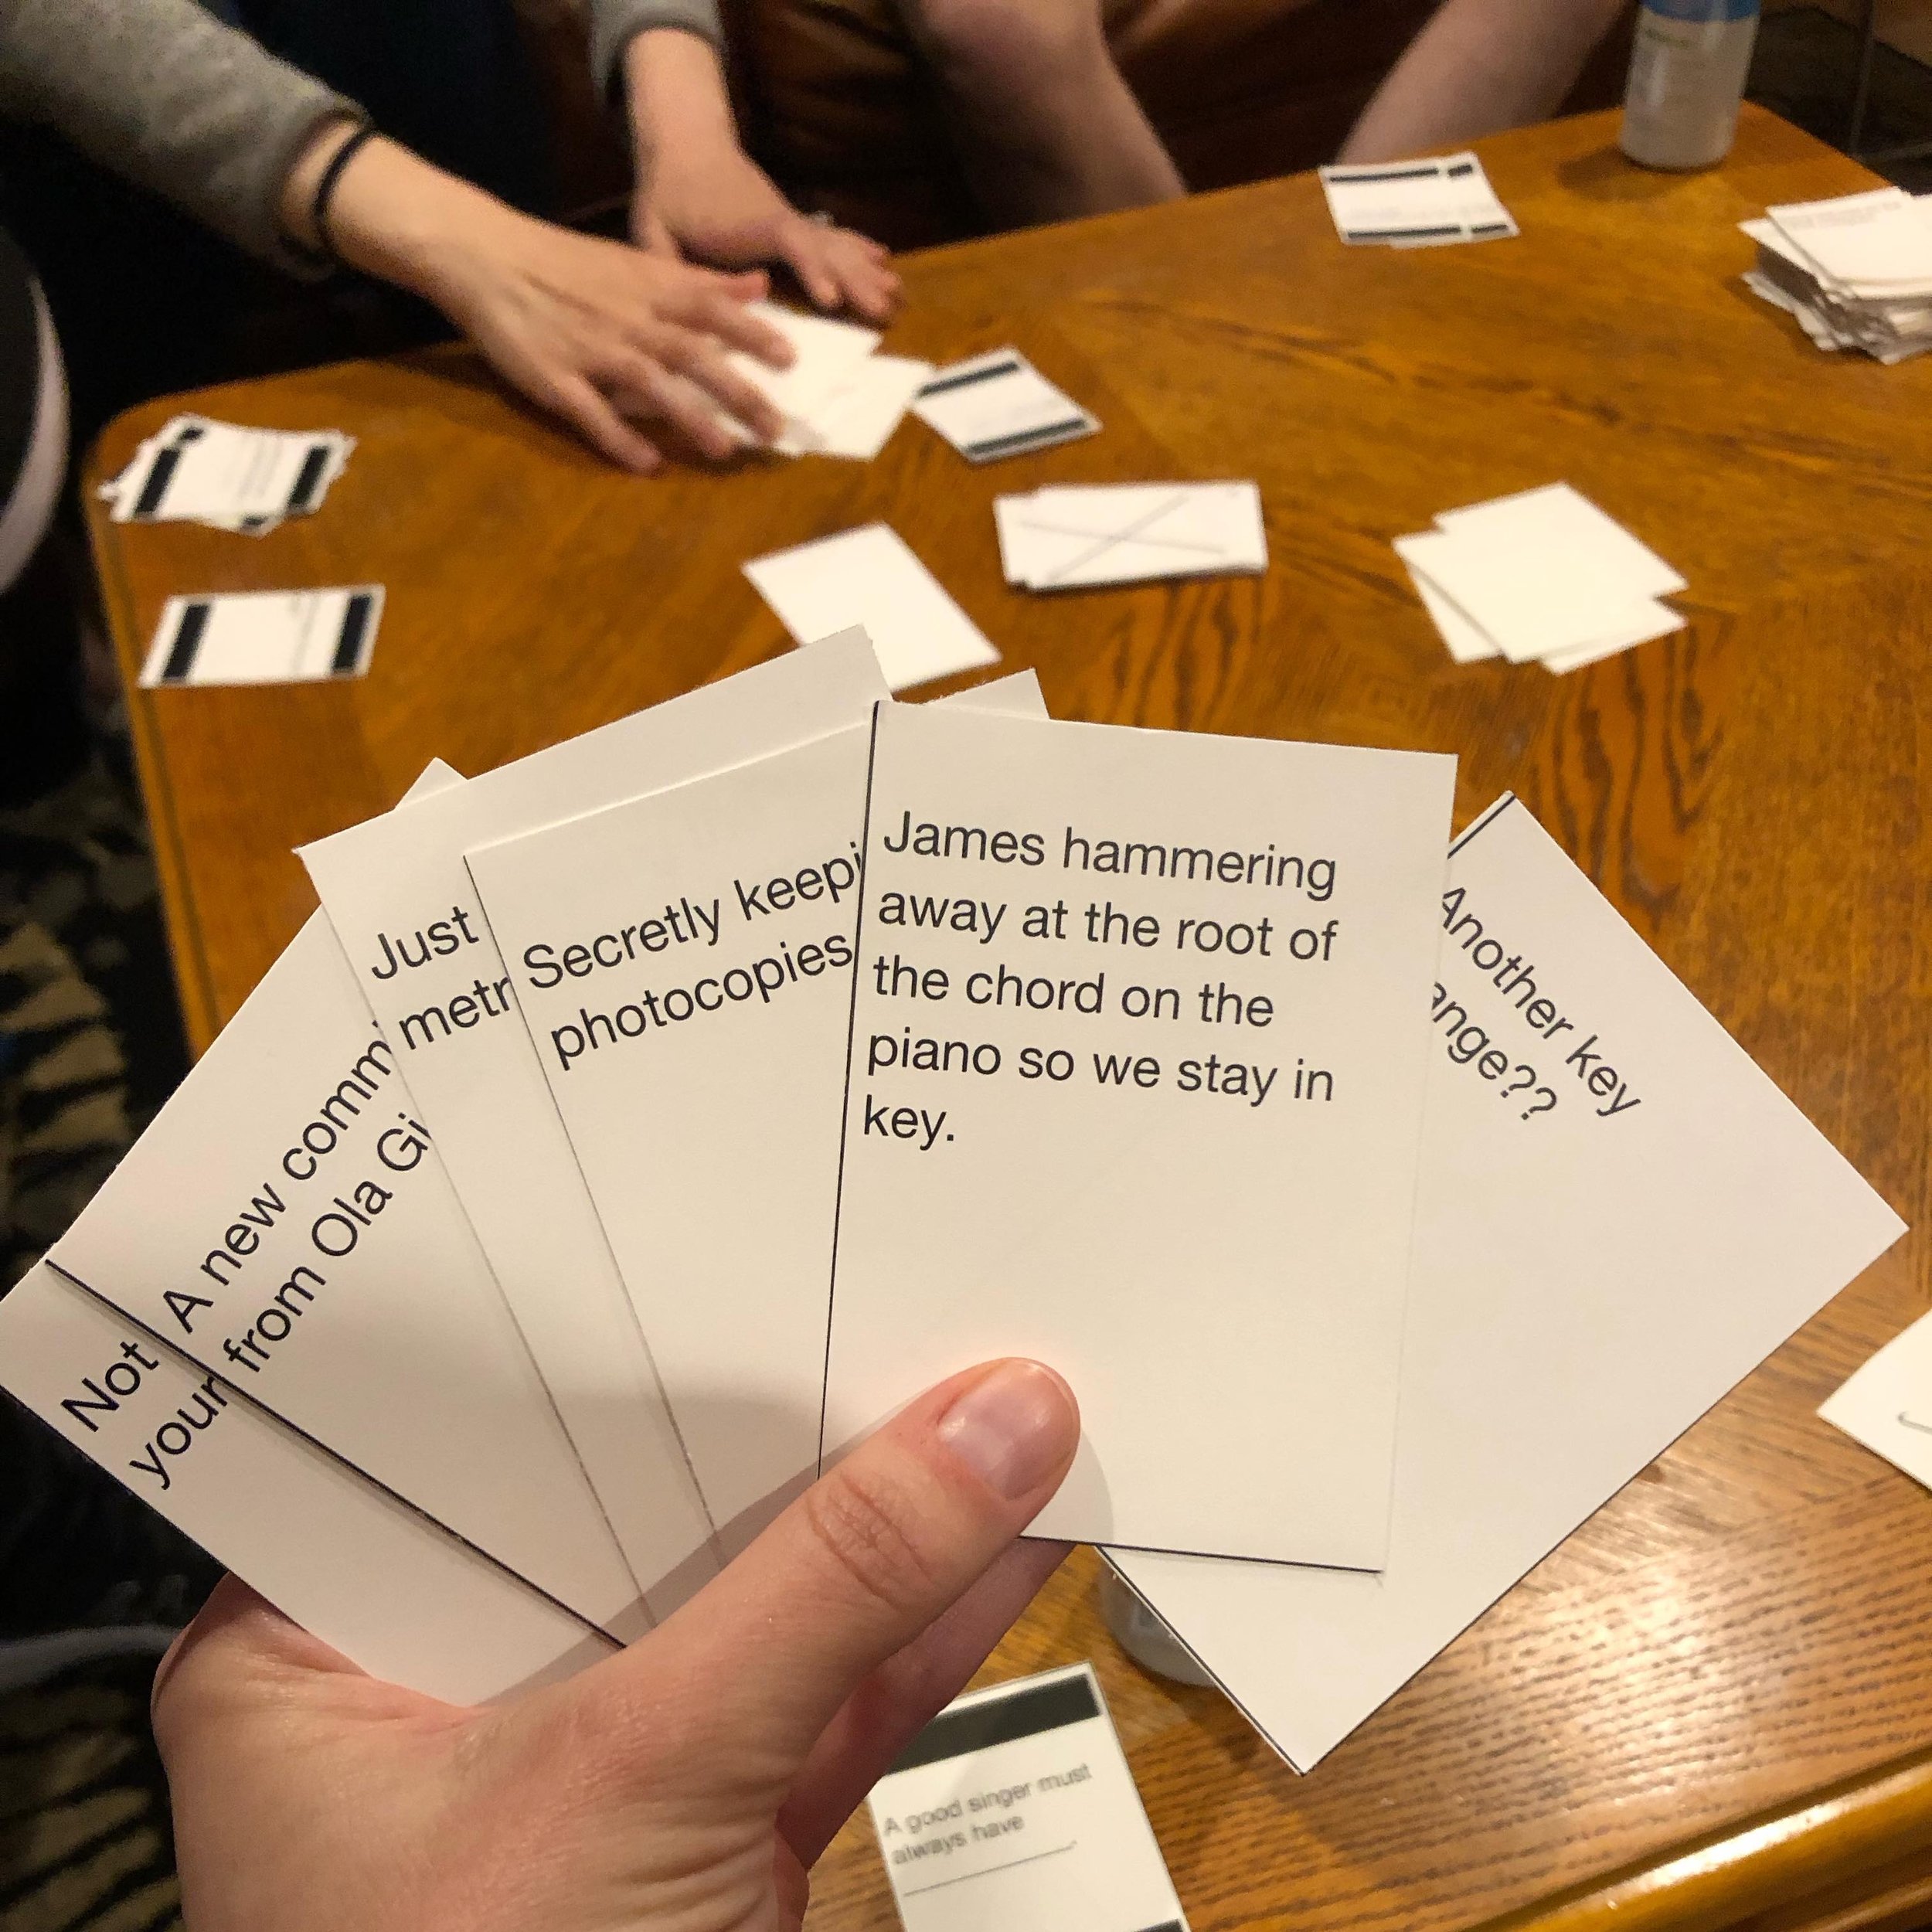 Signs that retreat weekend has officially begun, a rousing game of Cards Against Choral Singers 🎶 🃏 with this year&rsquo;s custom made expansion pack 😆 

#18thstsingers #choirretreat #DCmusic #DCchoir #shenanigans #anotherkeychange